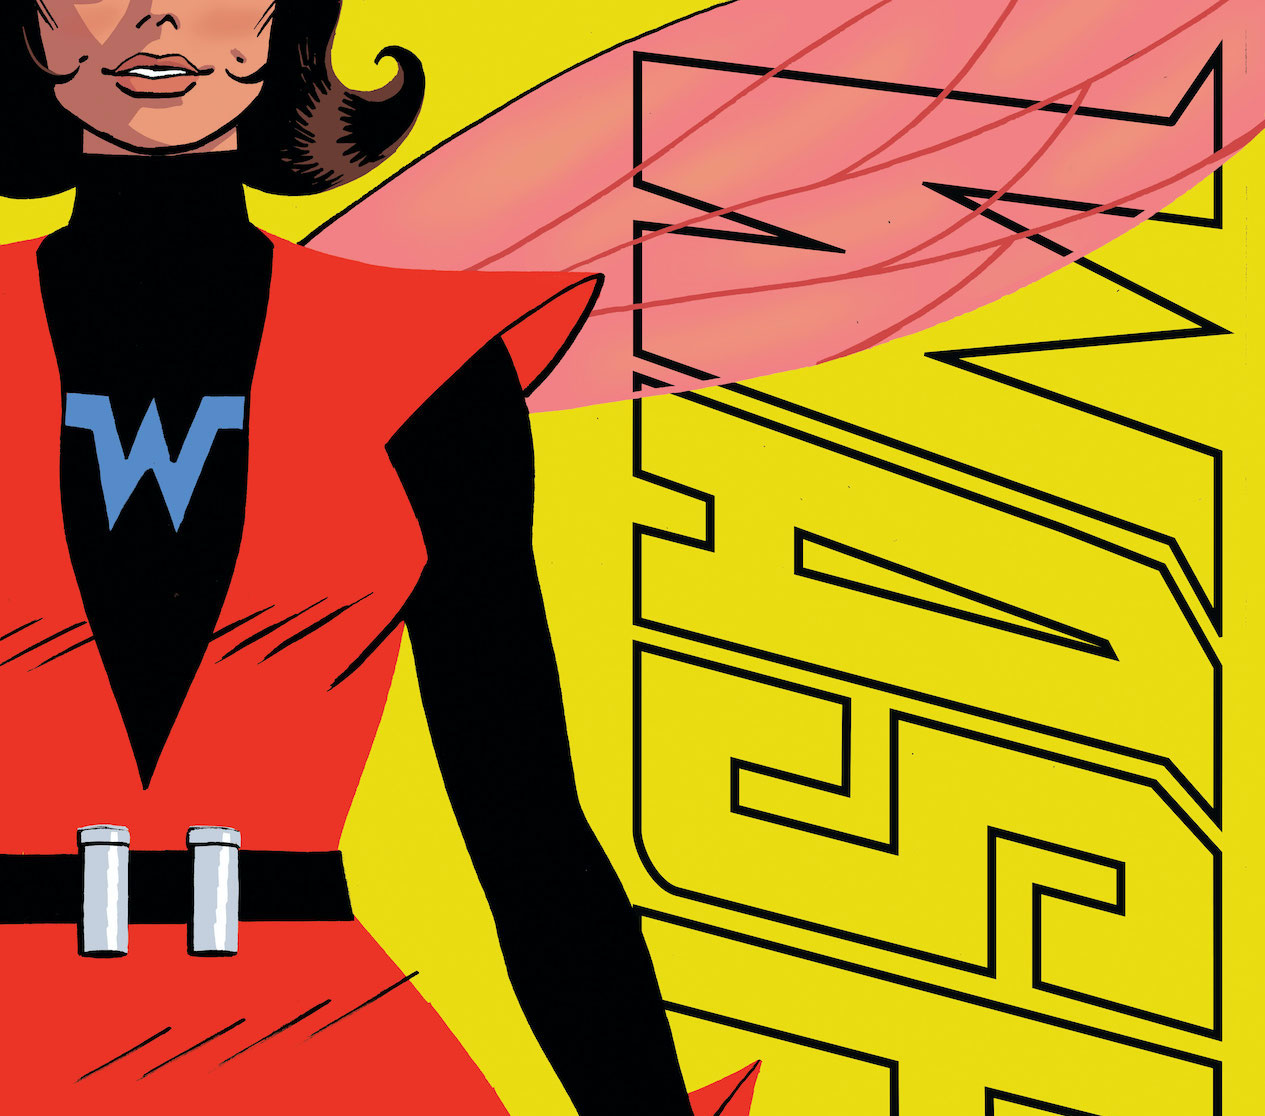 Al Ewing continues to honor Avengers with 'Wasp' #1 in January 2023